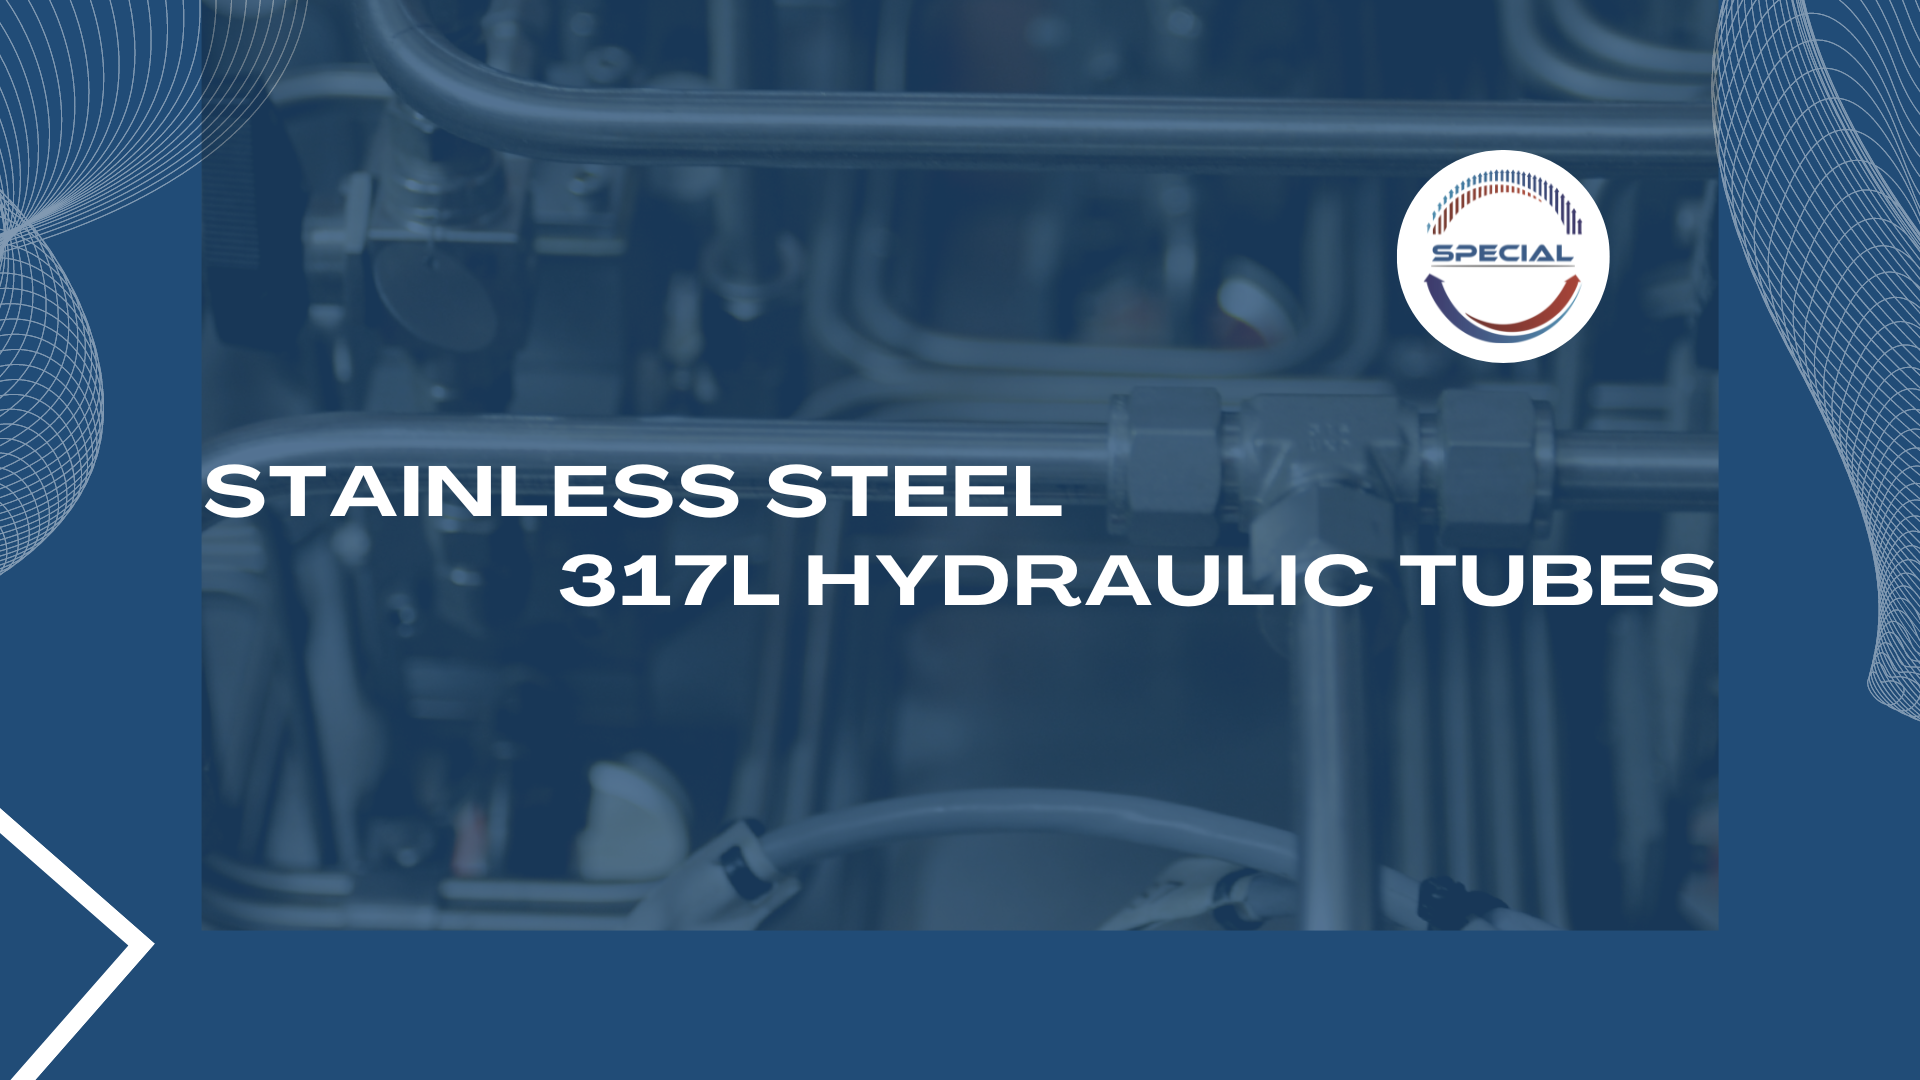 Stainless Steel 317L Hydraulic Tubes